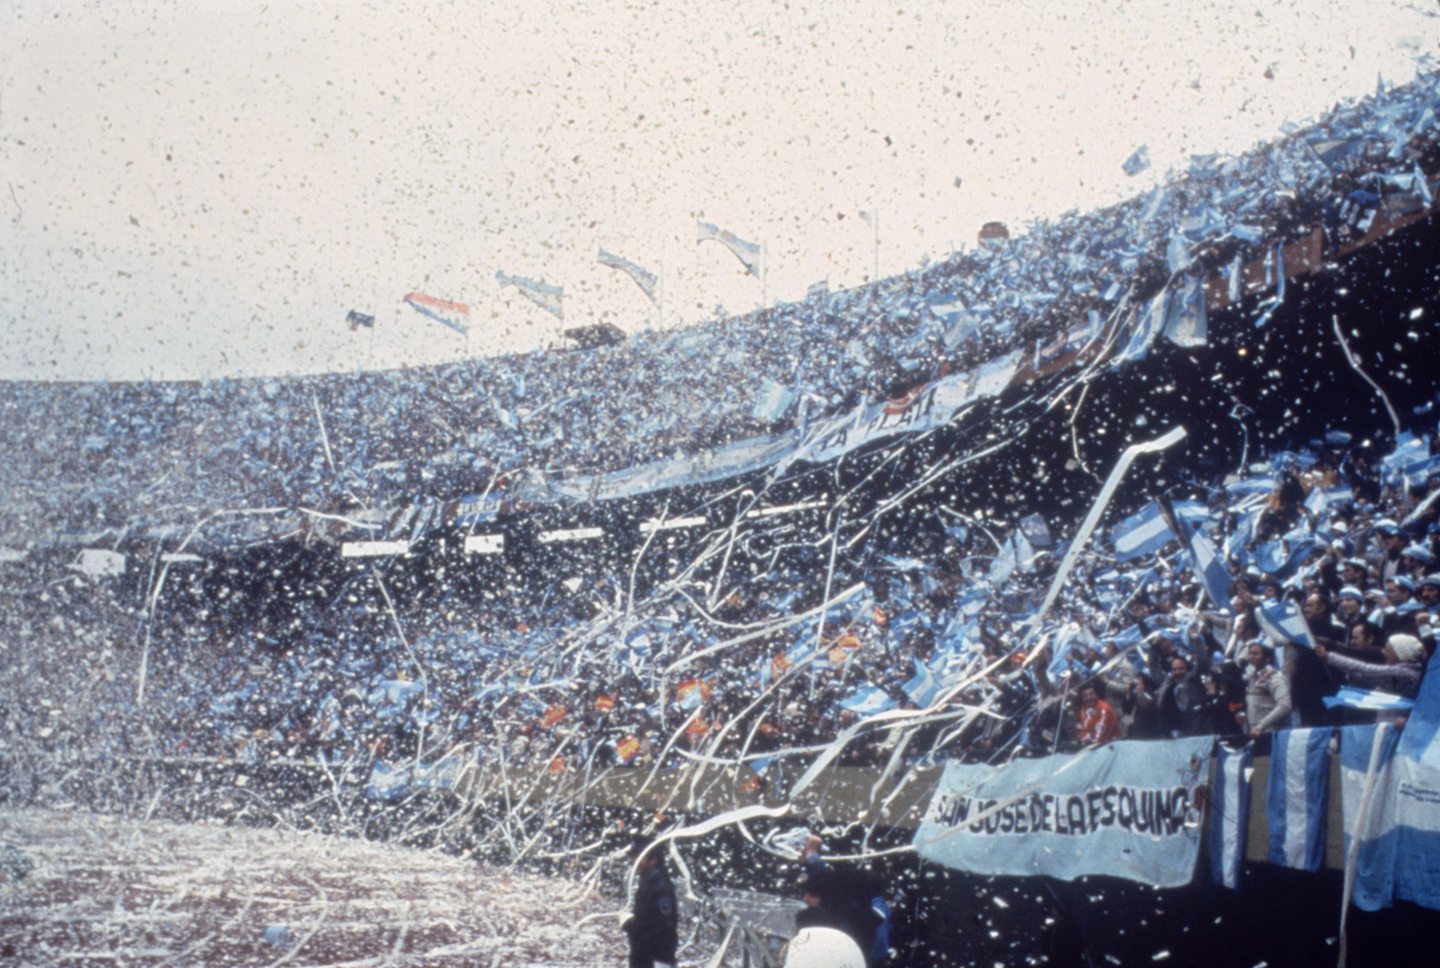 The 1978 World Cup ticker tape welcome produced one of football's defining images. Image: Shutterstock.